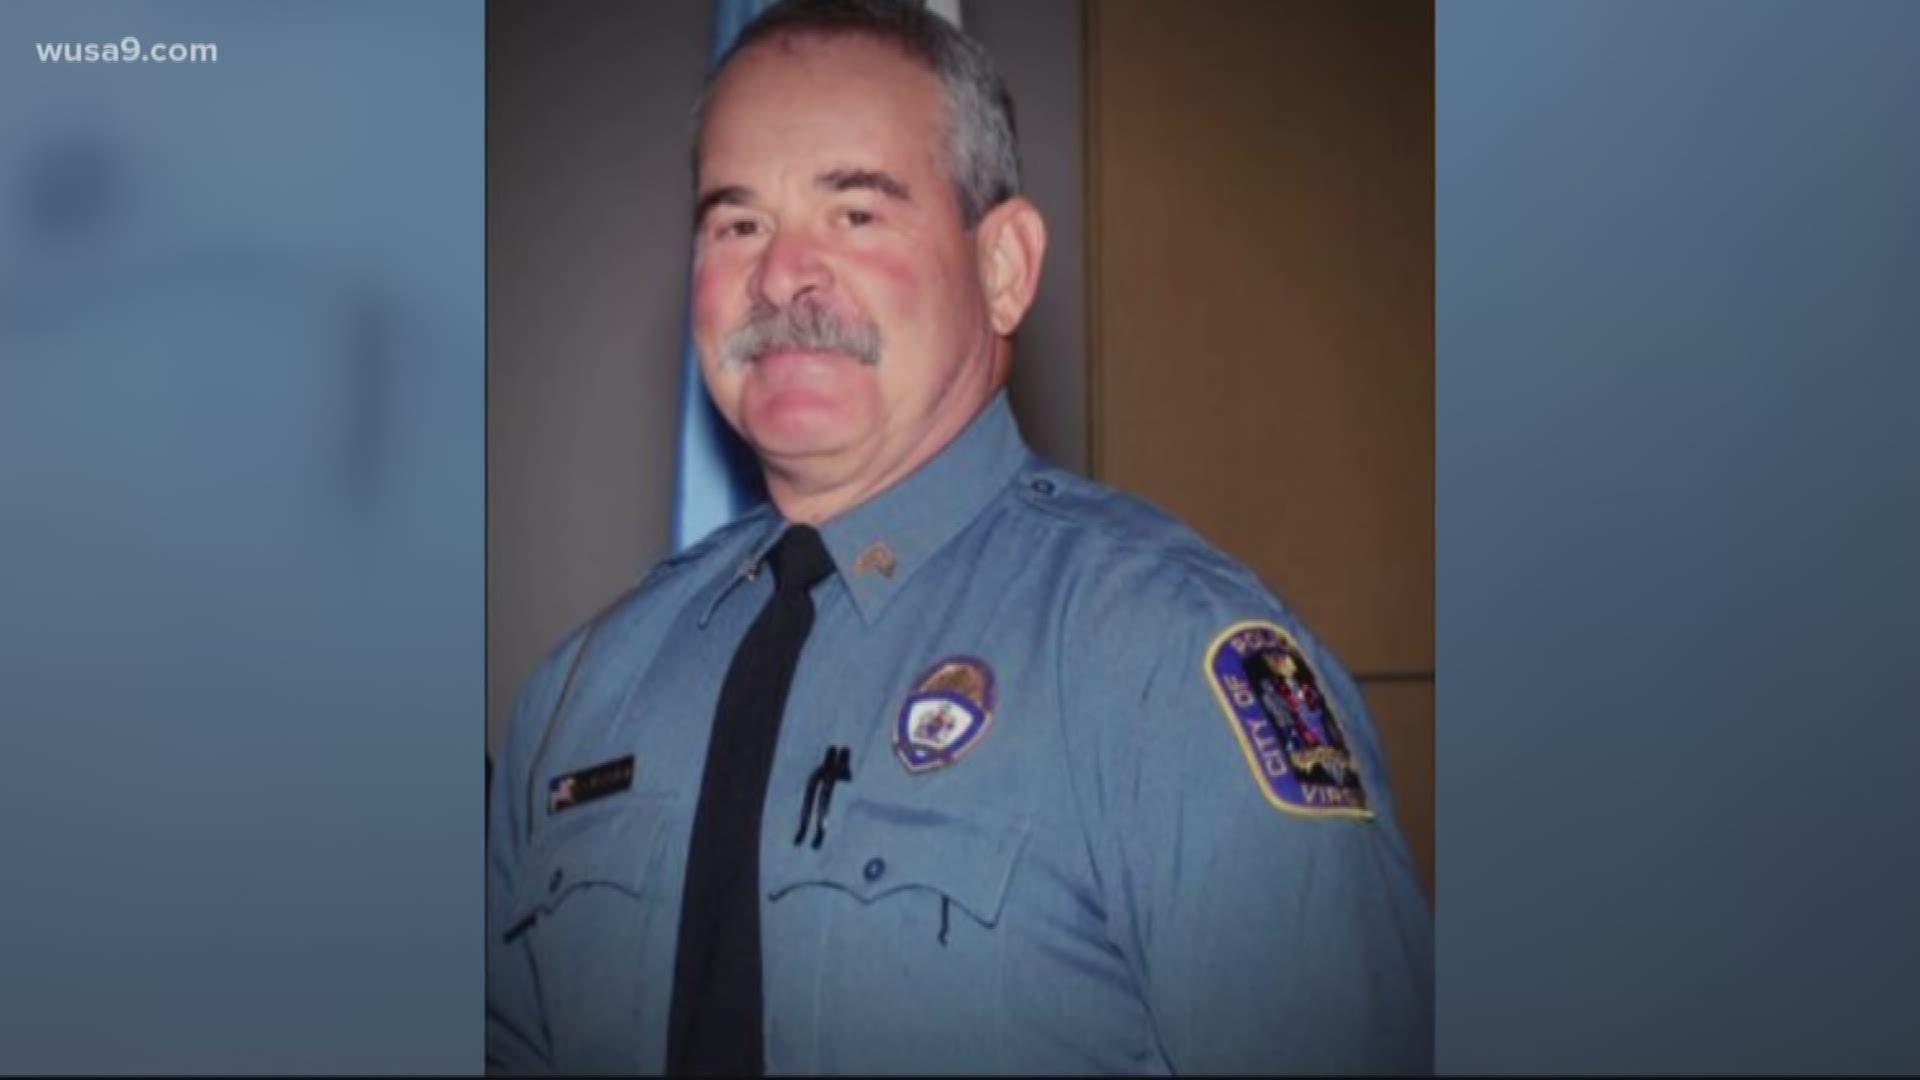 A veteran police officer of Fairfax died on Tuesday following a medical emergency while he was on duty.